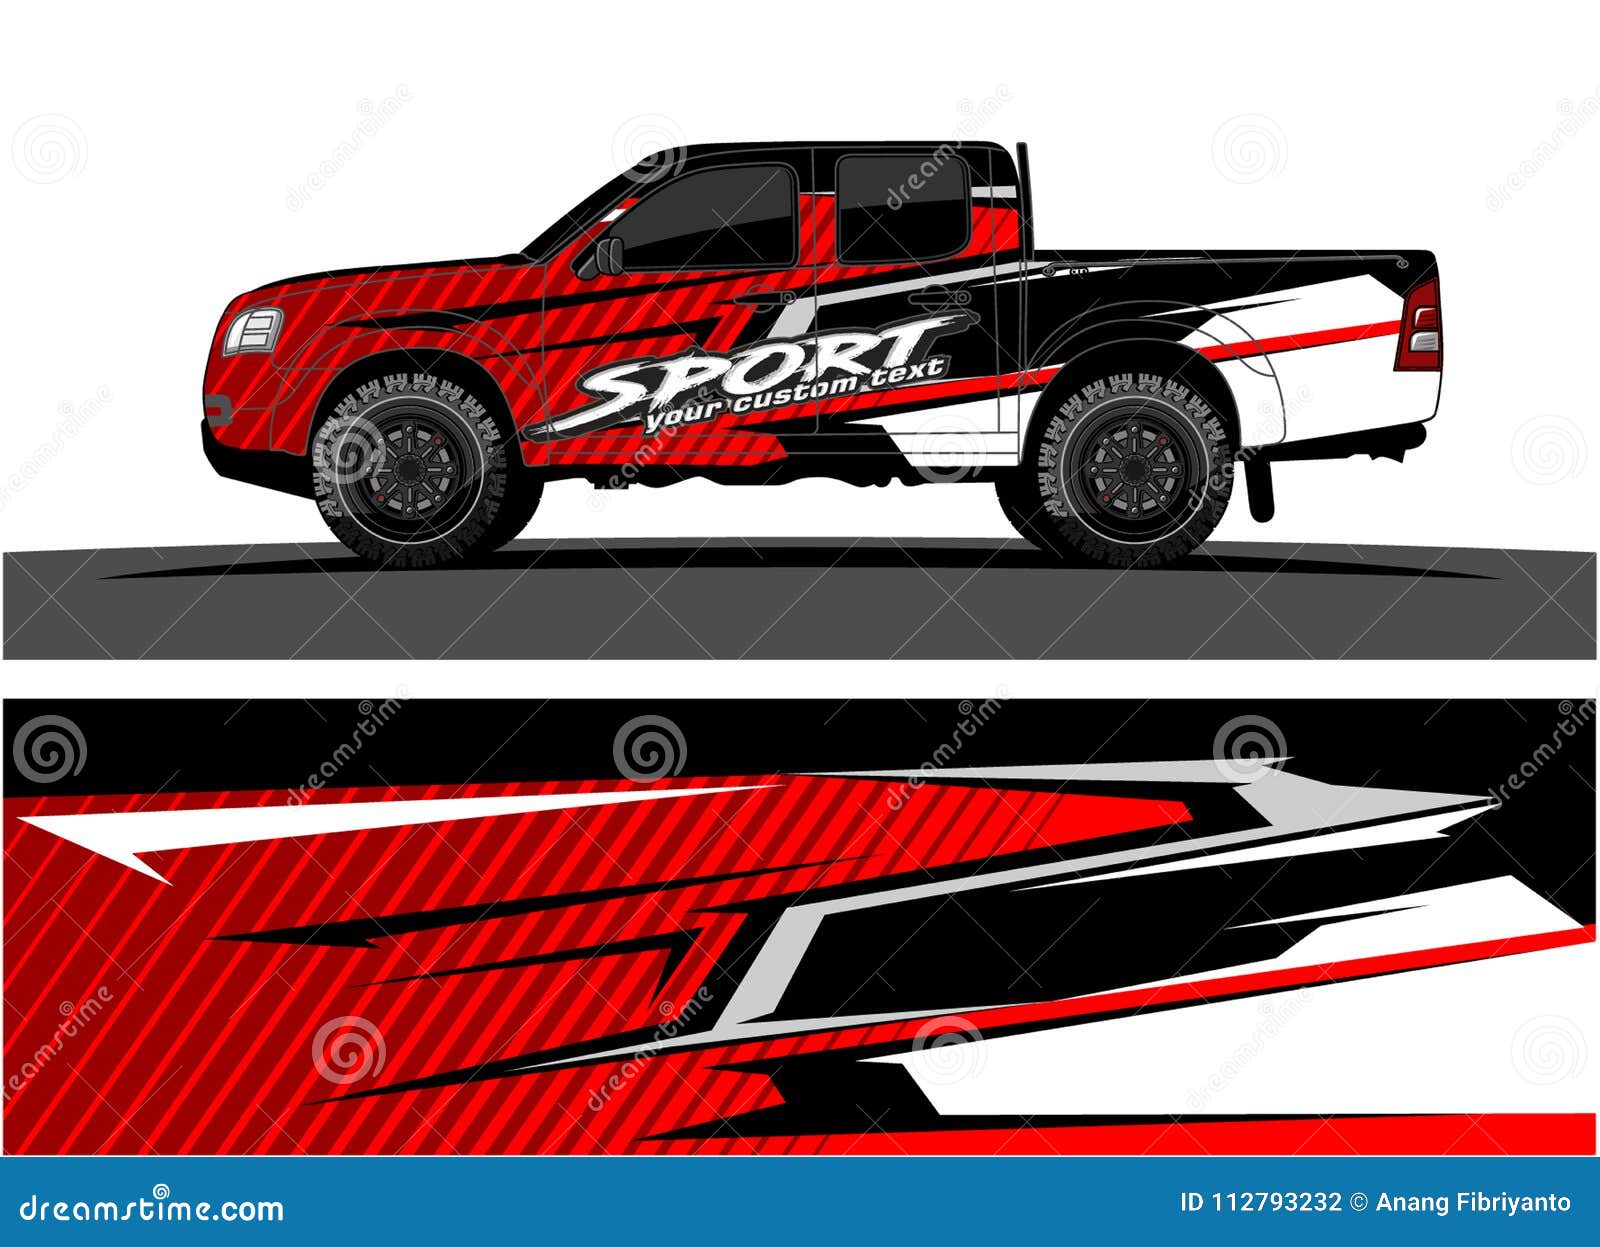 Truck Graphics. Vehicles Racing Stripes Background Stock Illustration -  Illustration of corporate, camo: 112793232